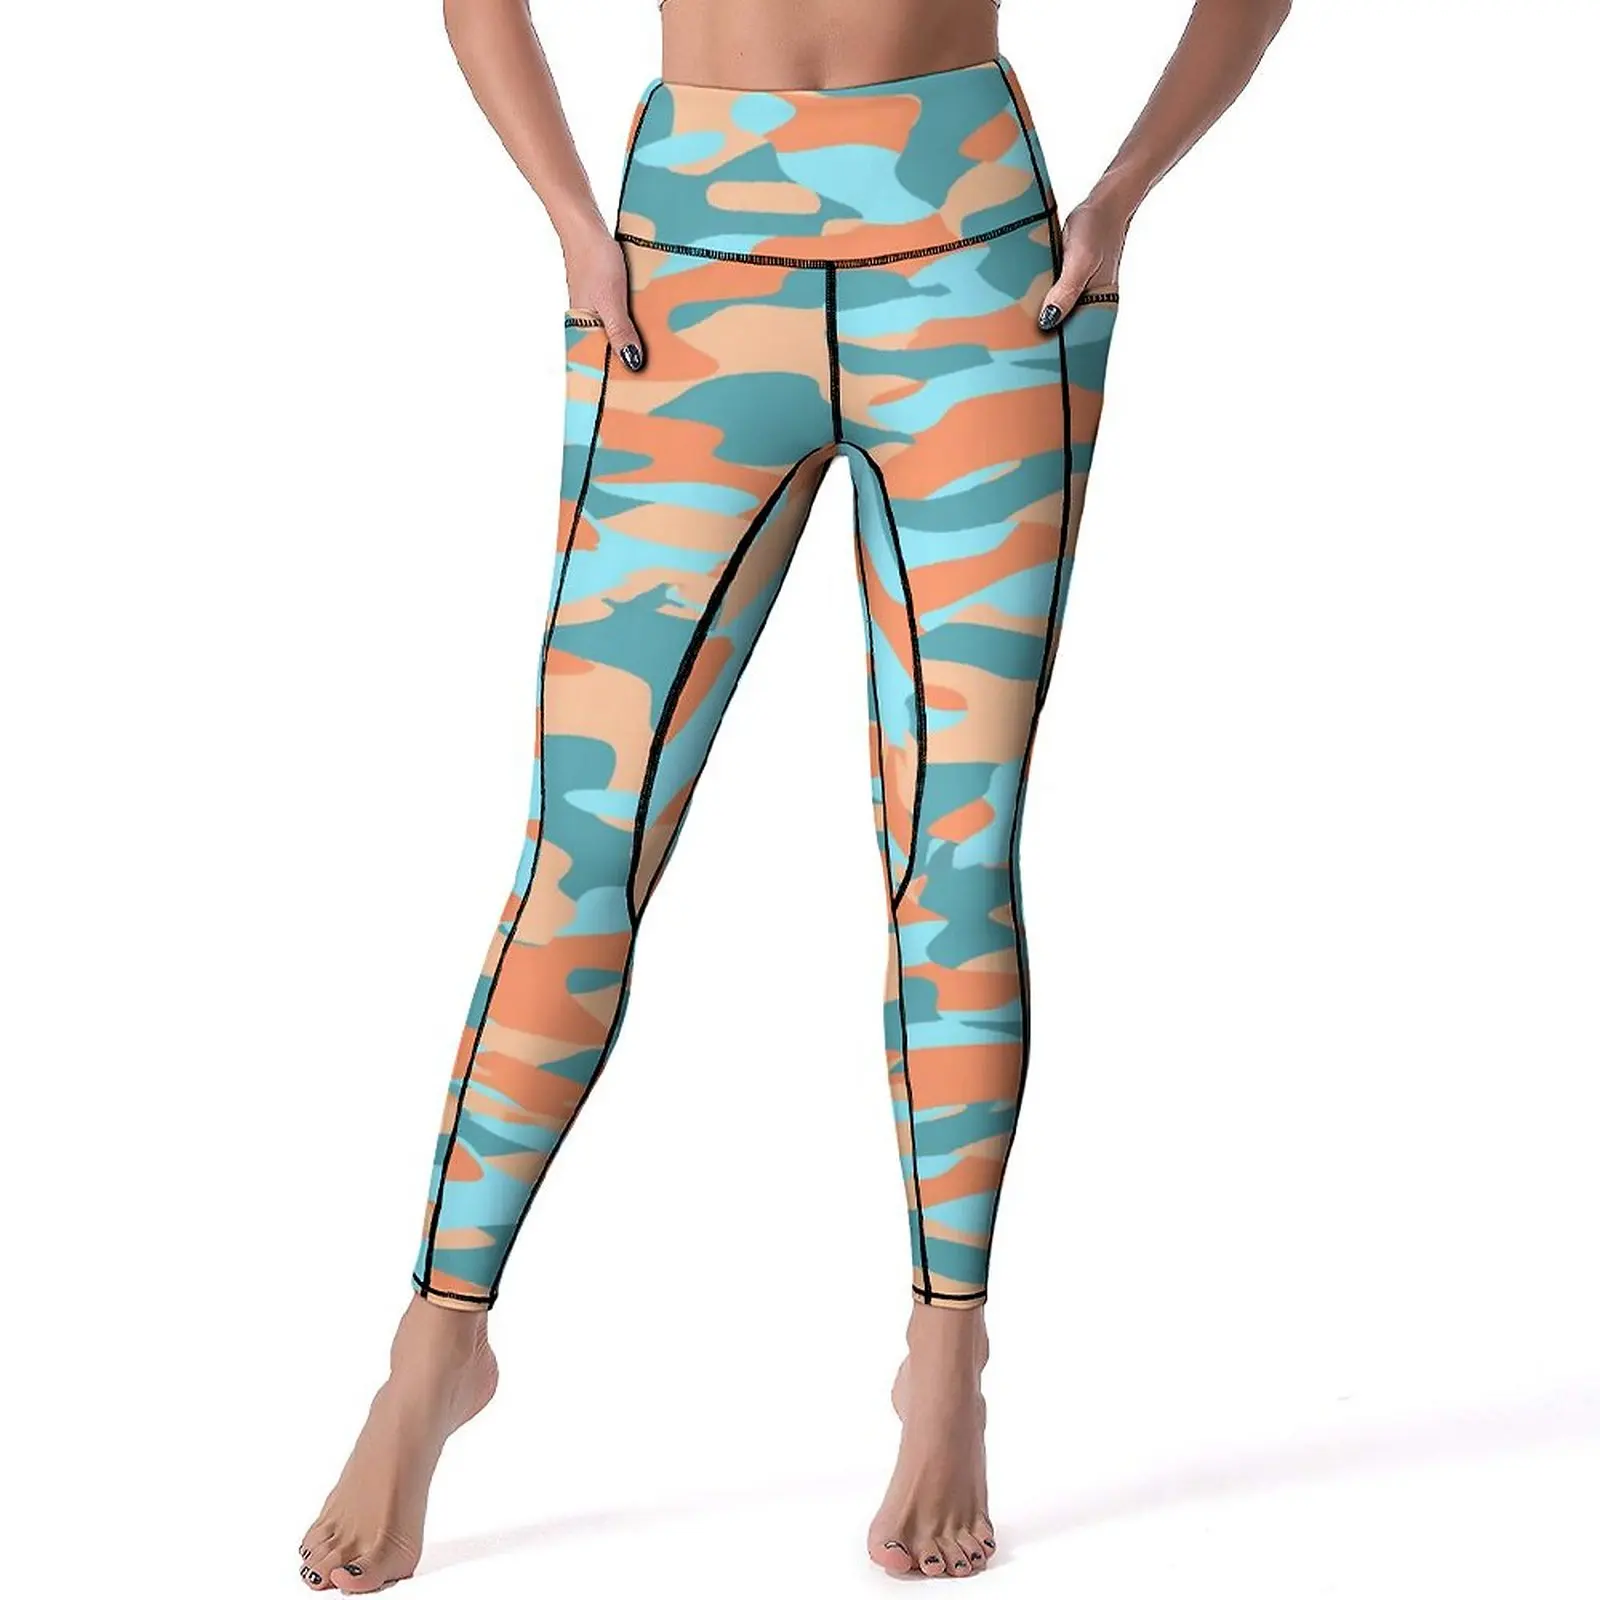 

Camo Leggings Sexy Orange Blue Camouflage Workout Yoga Pants High Waist Stretch Sports Tights With Pockets Sweet Design Leggins